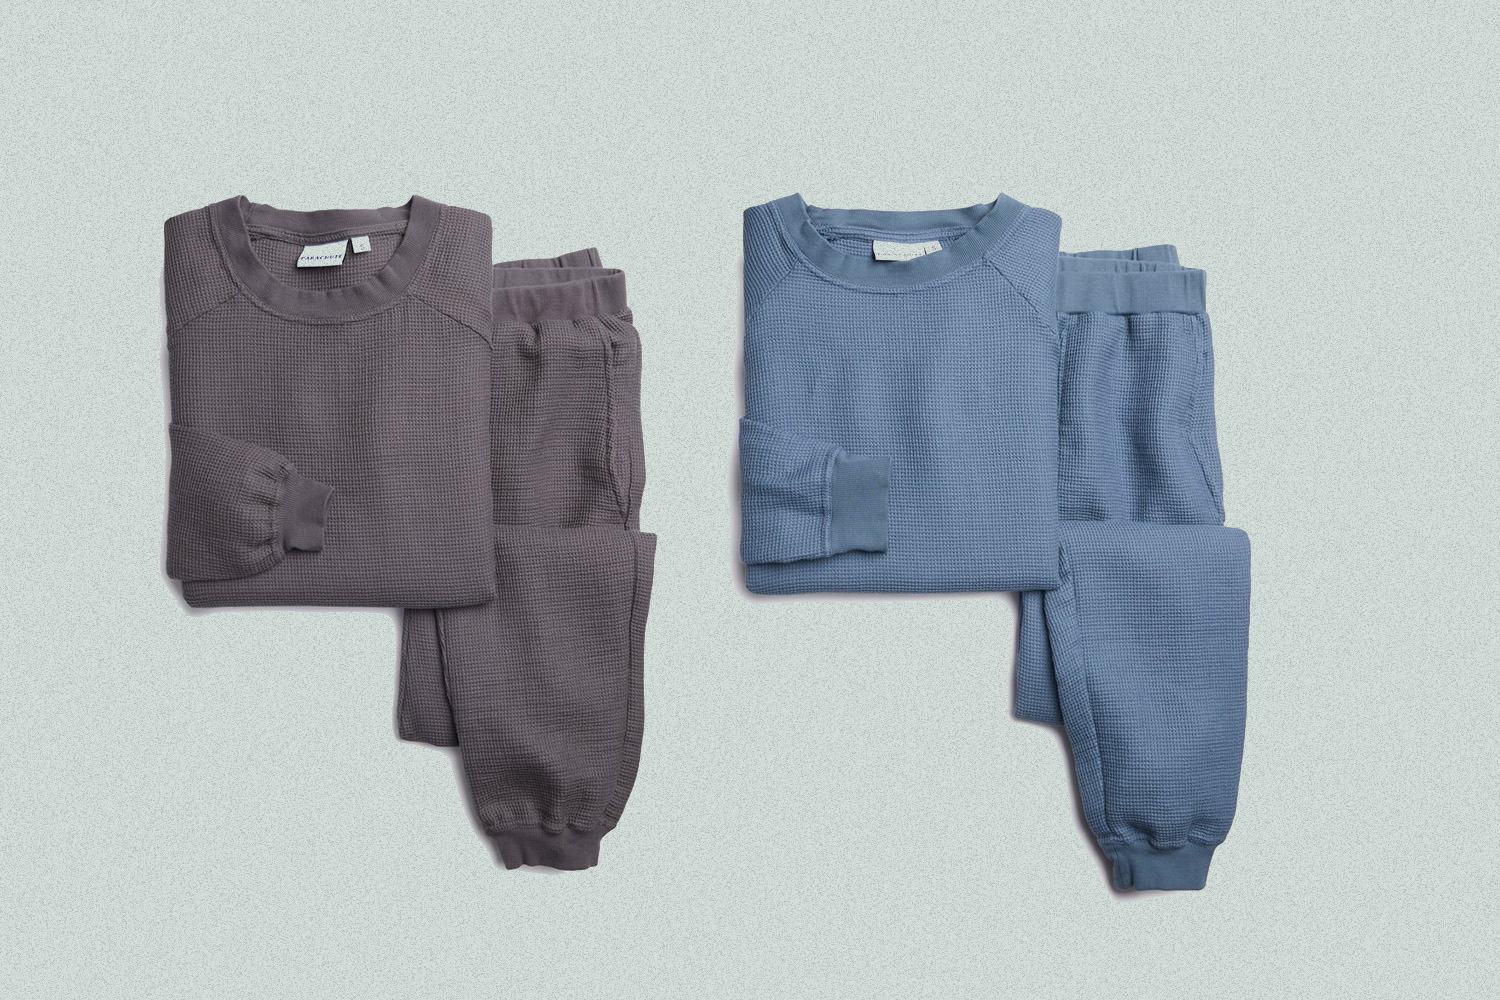 Parachute Home Just Dropped the Coziest Loungewear Set